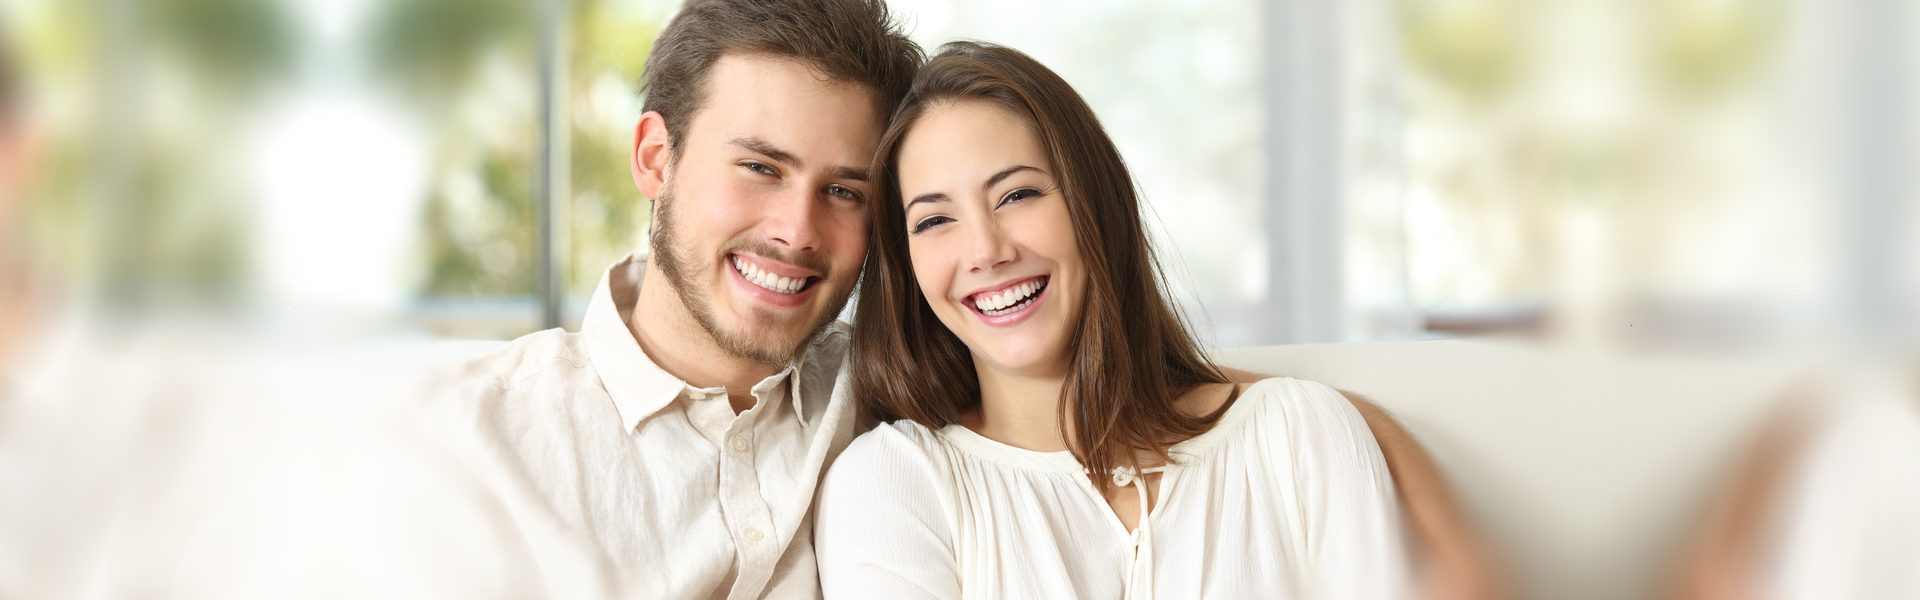 How Dental Implant Improve Your Health As Well As Your Smile